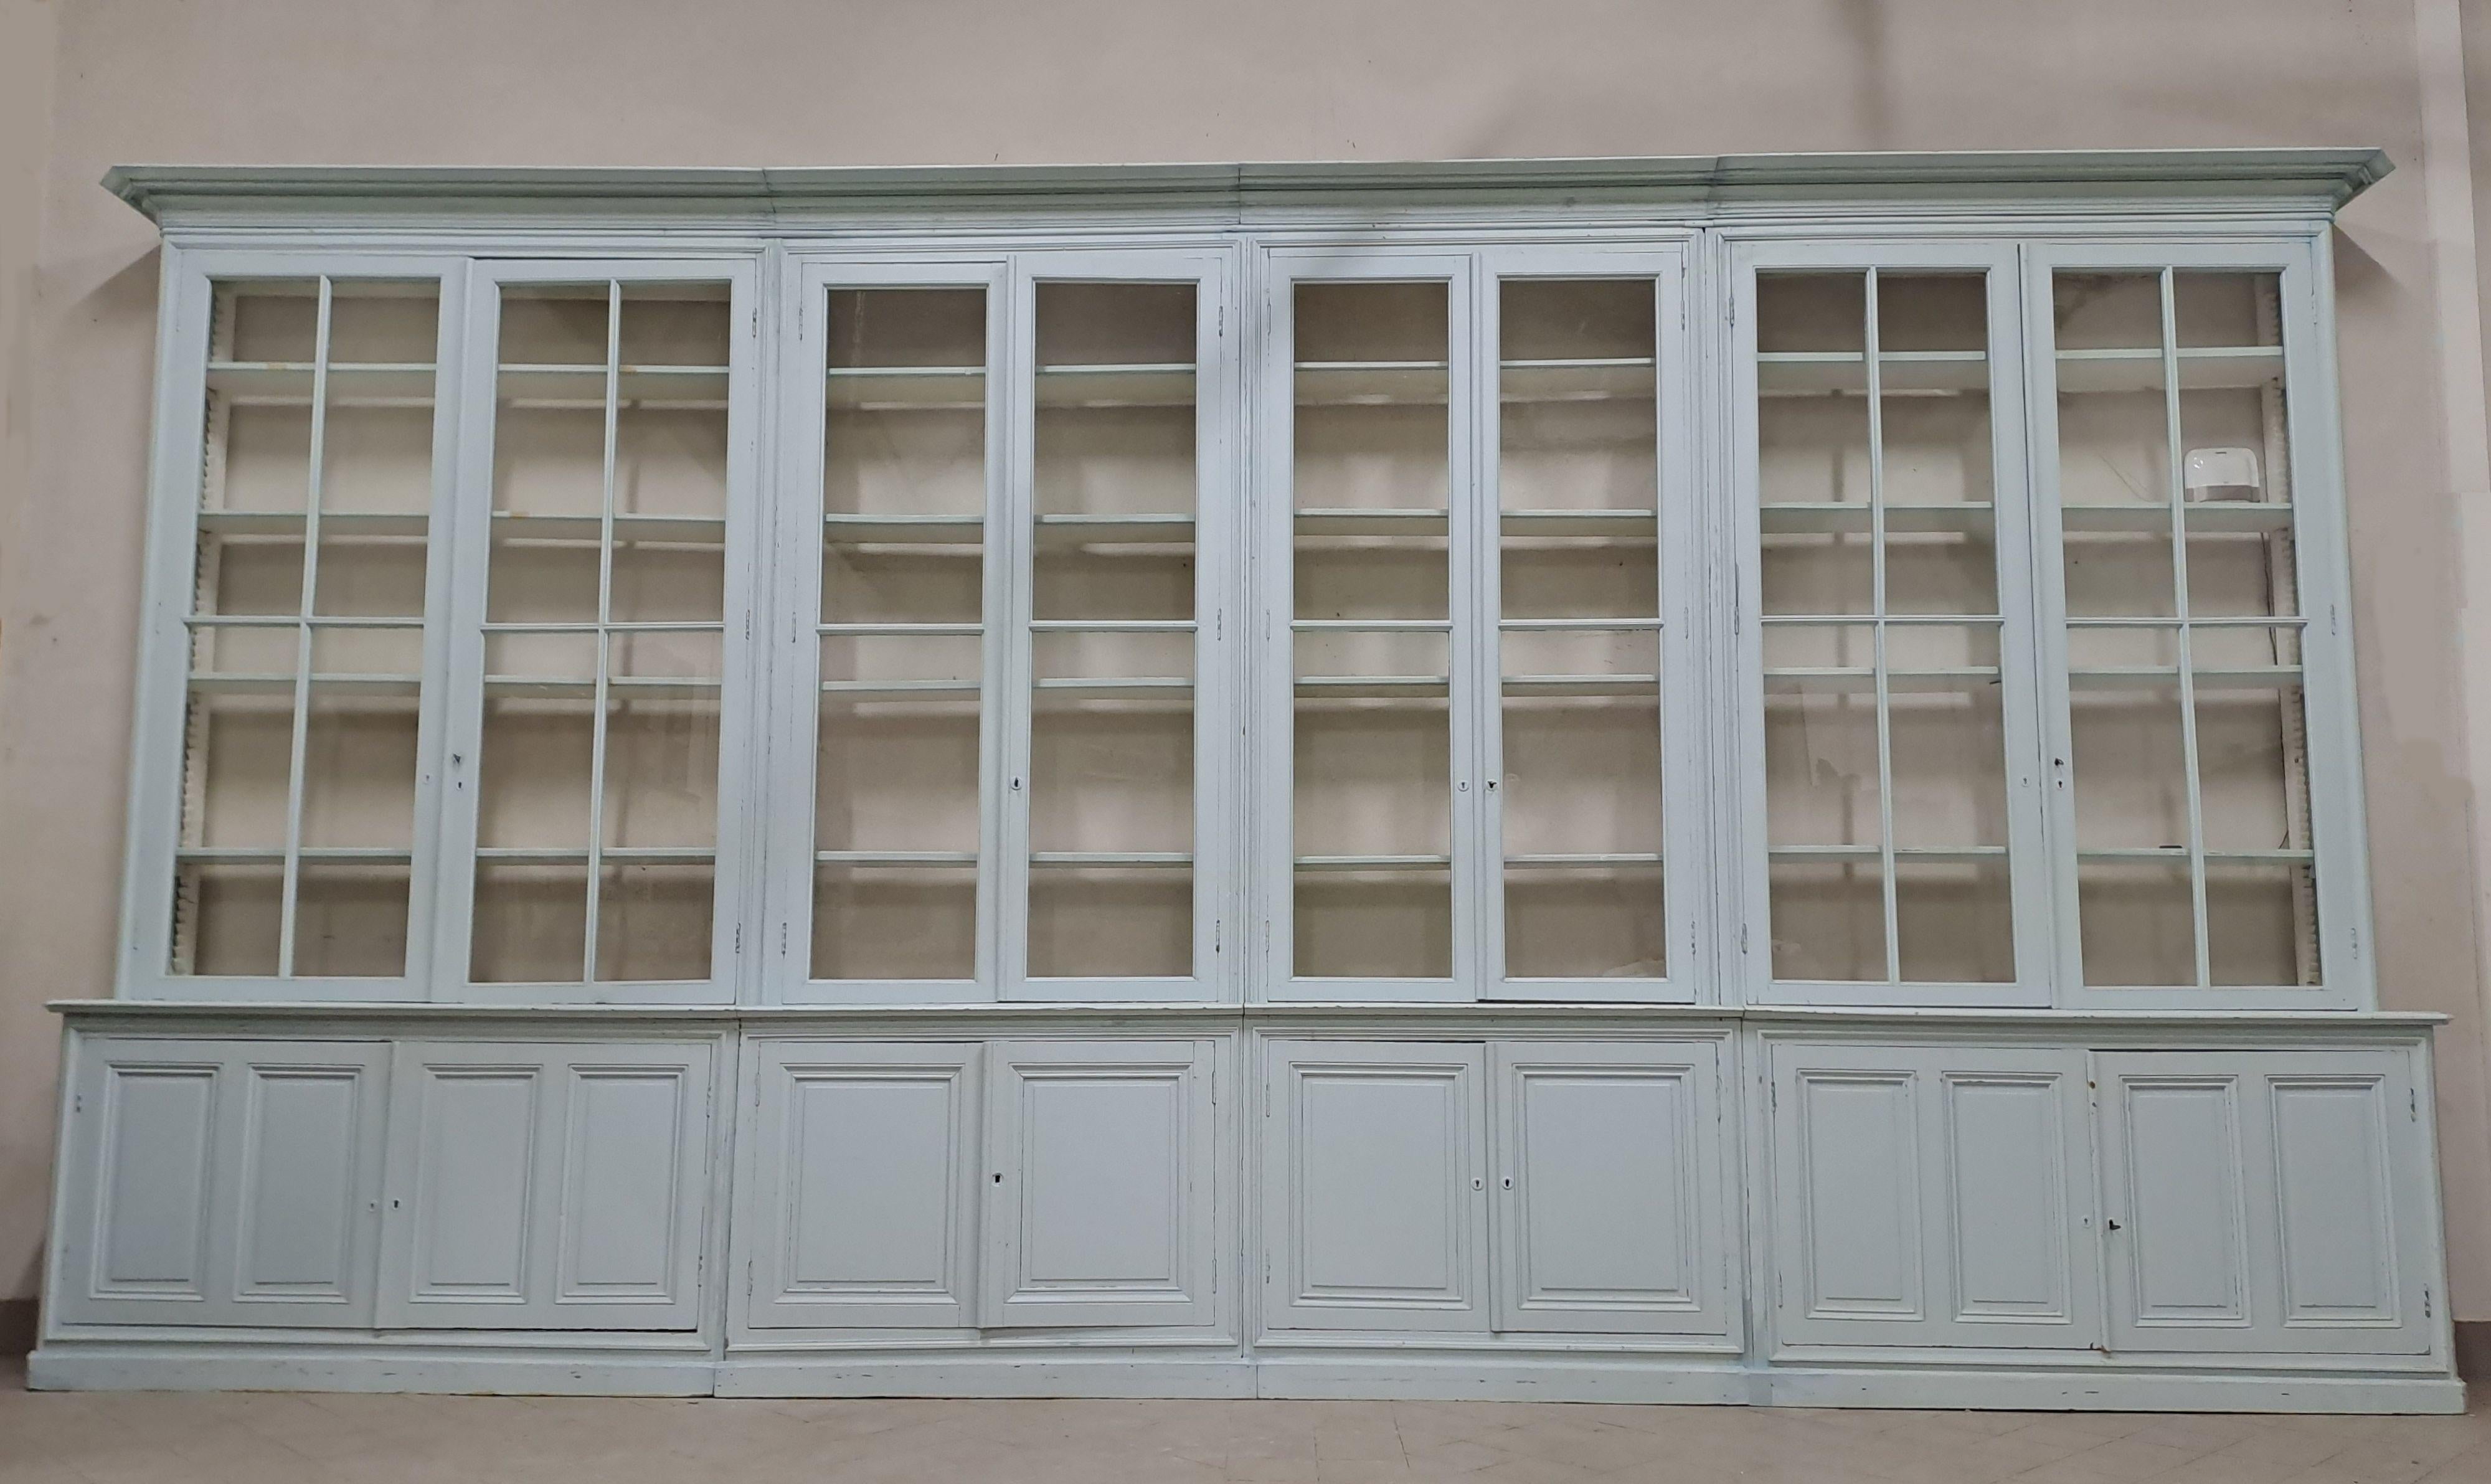 Very large bookcase in white/sky blue lacquered fir wood, opening with four double glass doors in the upper part and four solid double doors in the lower part.

19th century work, molded and paneled facades and sides, old glass.

Numerous solid wood